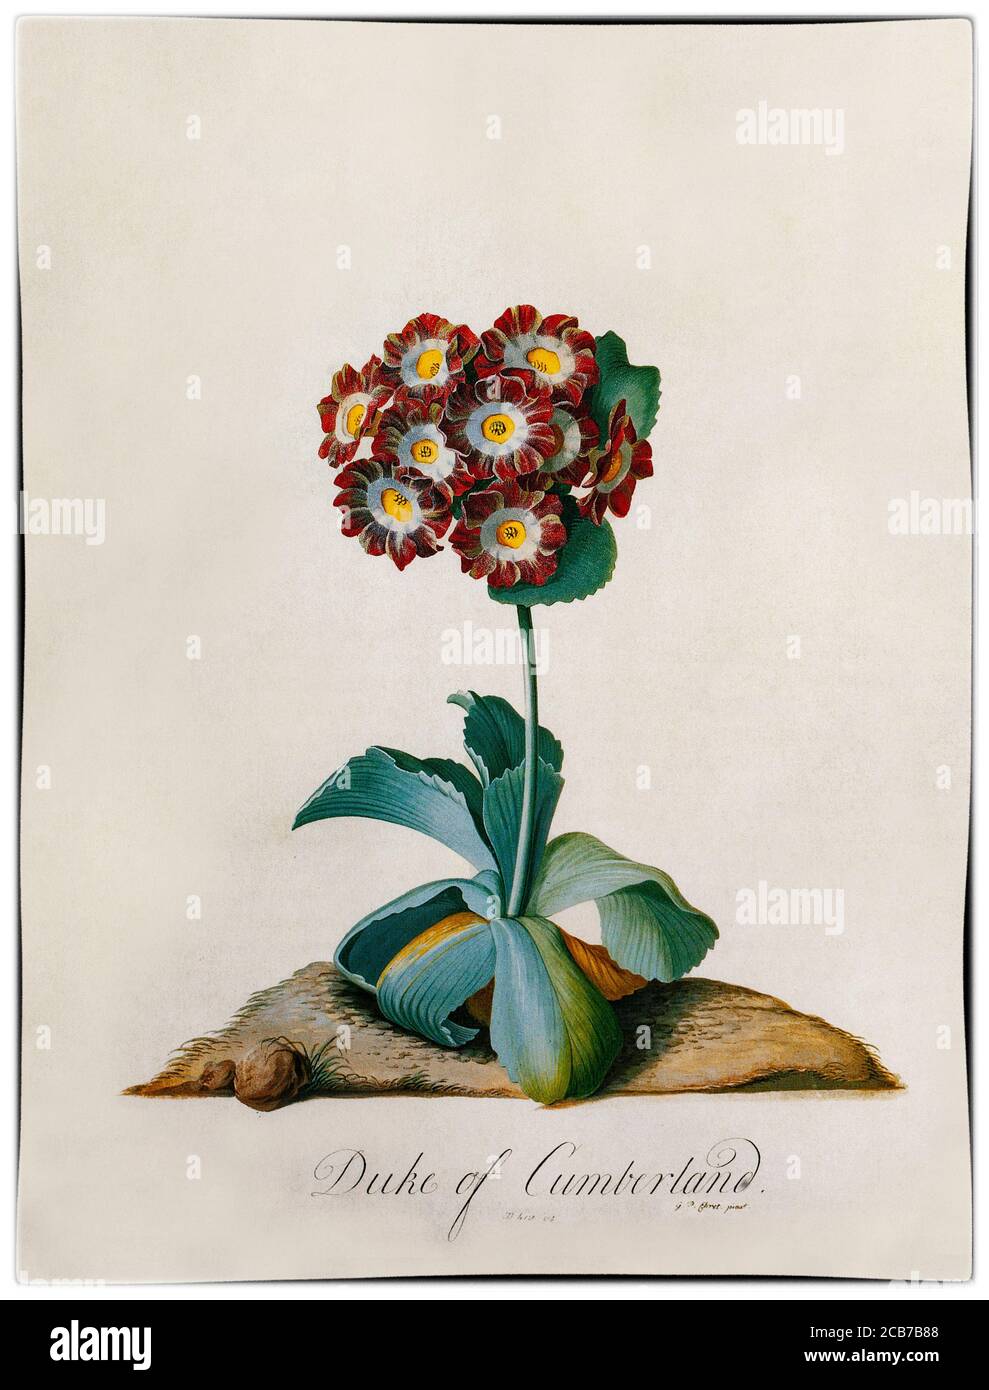 Auricula 'Duke of Cumberland' painted by Georg Dionysius Ehret (1708-1770),  a German botanist and entomologist known for his botanical illustrations who became one of the most influential European botanical artists of all time. His first illustrations were in collaboration with Carl Linnaeus and George Clifford in 1735-1736. Clifford, a wealthy Dutch banker and governor of the Dutch East India Company was a keen botanist with a large herbarium. Stock Photo